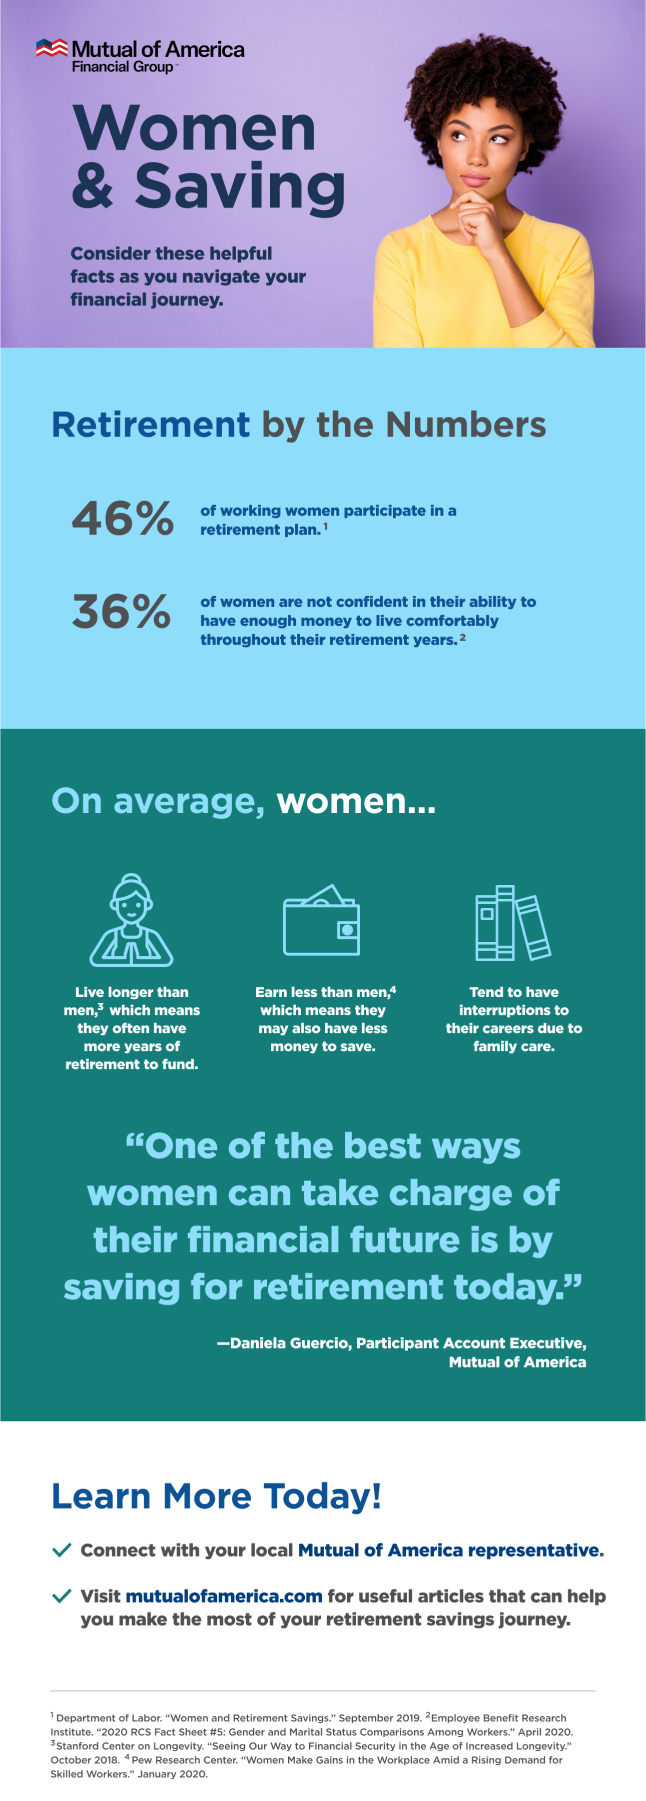 An infographic detailing women and retirement savings. 46% of working women participate in a retirement plan (data provided by Department of Labor). 36% of women are not confident that they’ll save enough money to live comfortably throughout retirement (data provided by Employee Benefit Research Institute). On average, women live longer than men, earn less than men and tend to have career interruptions due to family care (data provided by Stanford Center on Longevity and Pew Research Center). Daniela Guercio, Participant Account Executive for Mutual of America, offers this quote: “One of the best ways women can take charge of their financial future is by saving for retirement today.” Connecting with your local Mutual of America representative is encouraged along with a visit to mutualofamerica.com for useful articles that can help you make the most of your retirement savings journey.